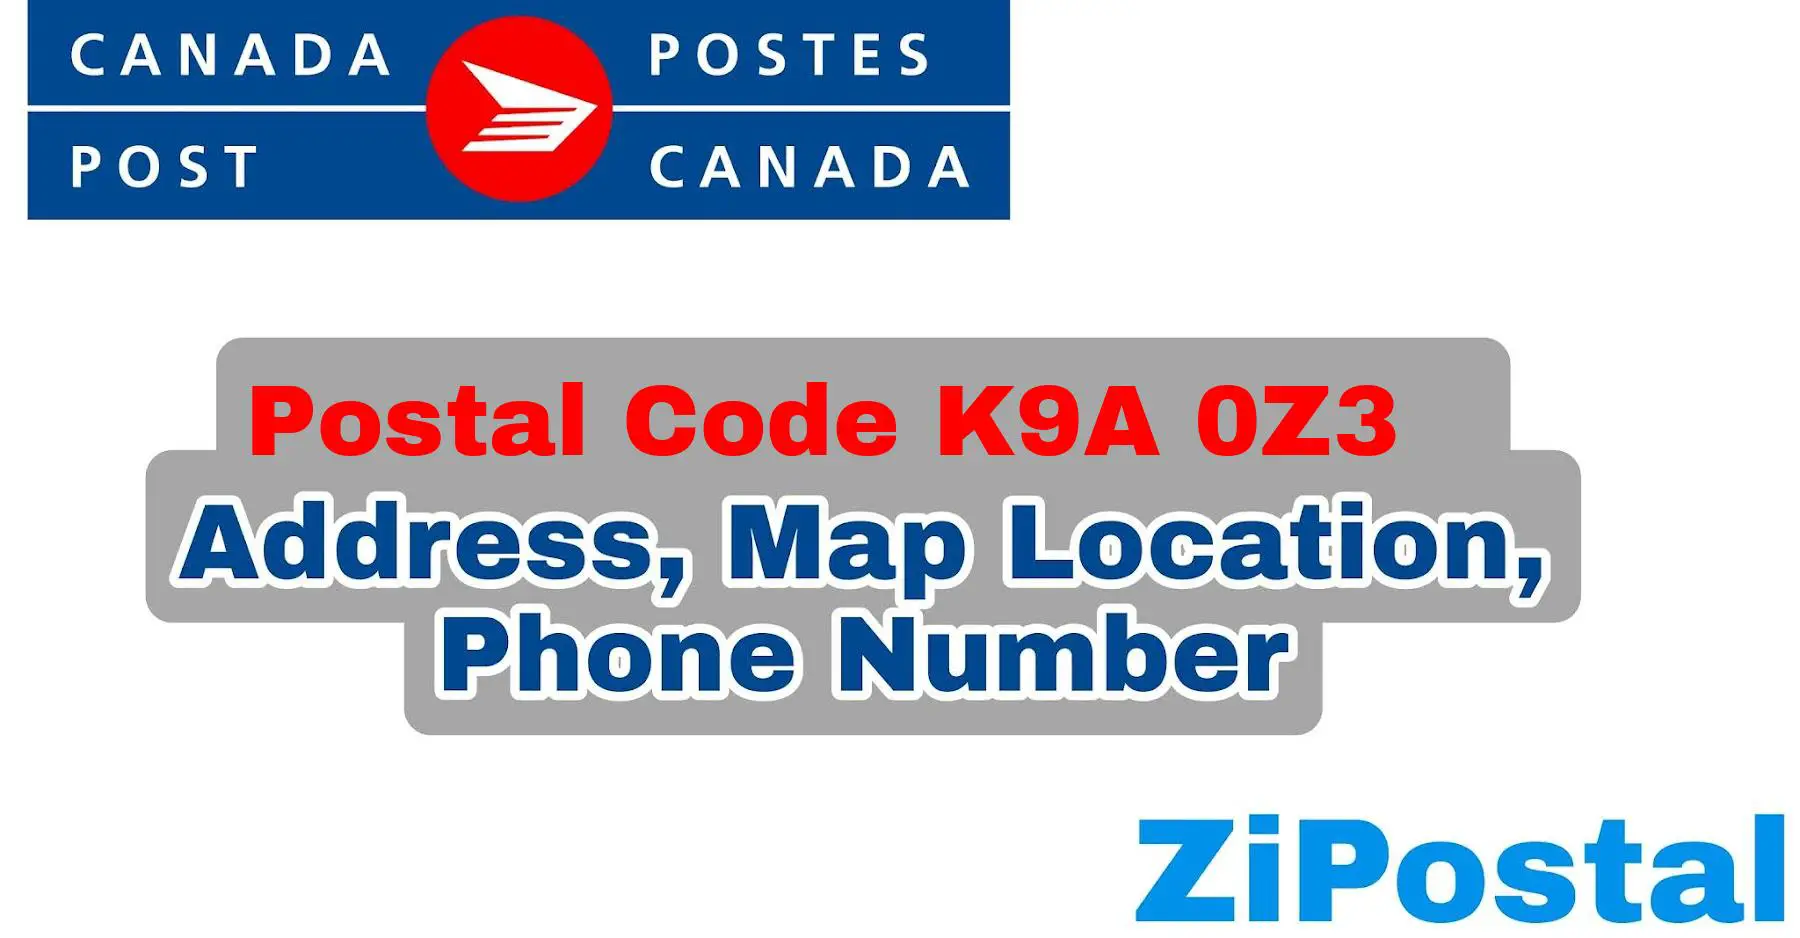 Postal Code K9A 0Z3 Address Map Location and Phone Number